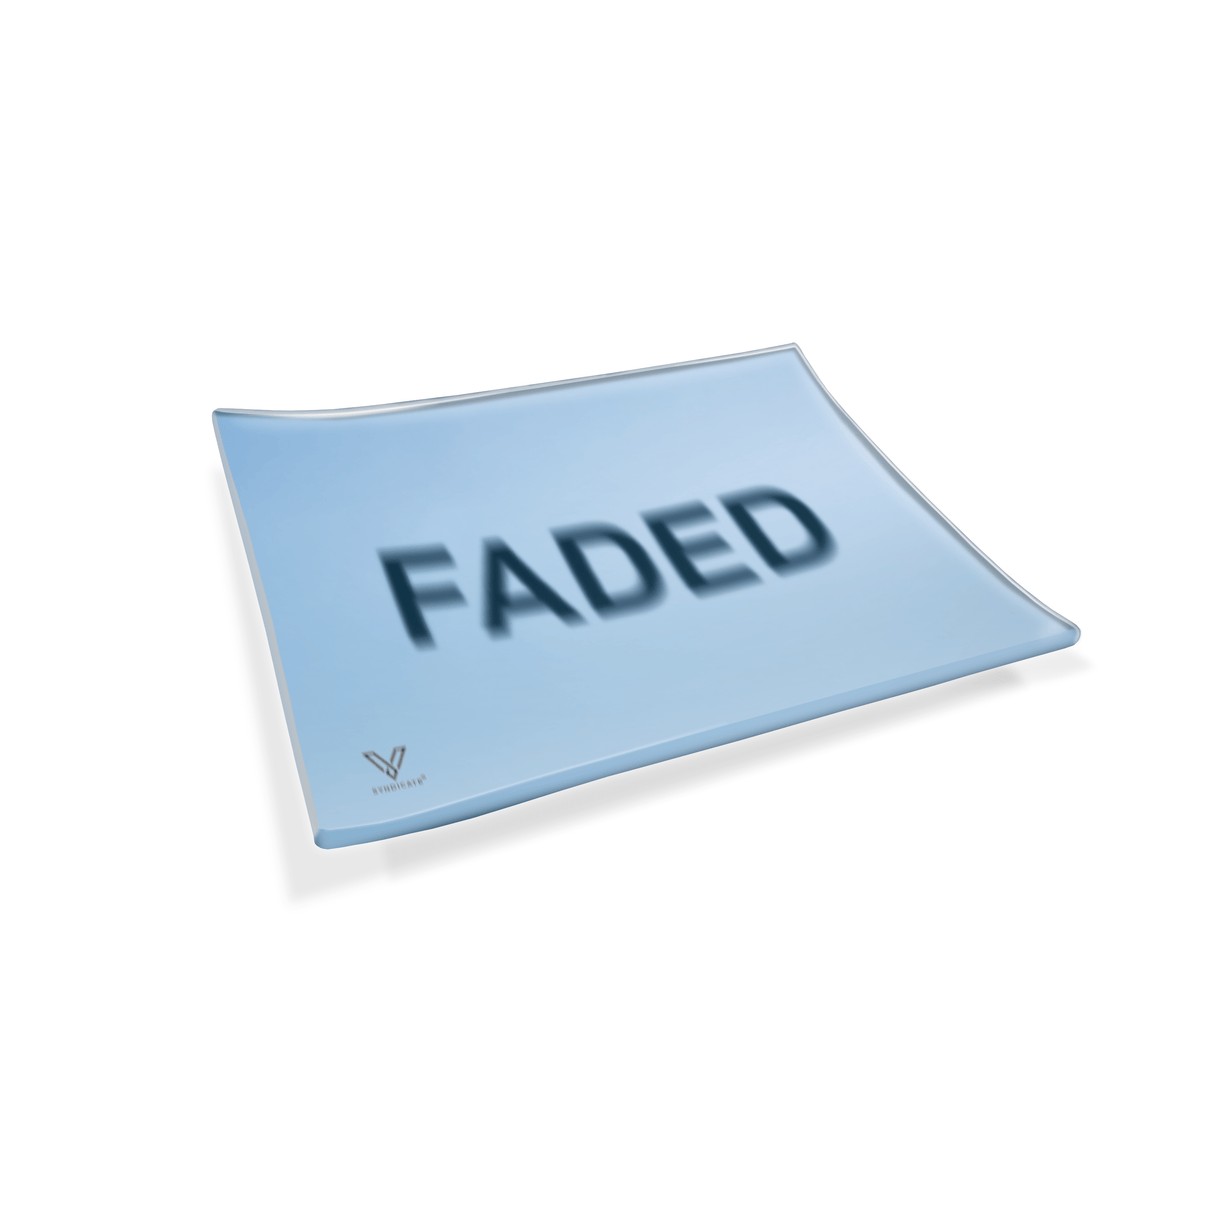 V Syndicate Faded Glass Rollin' Tray in white with novelty design, angled view on white background